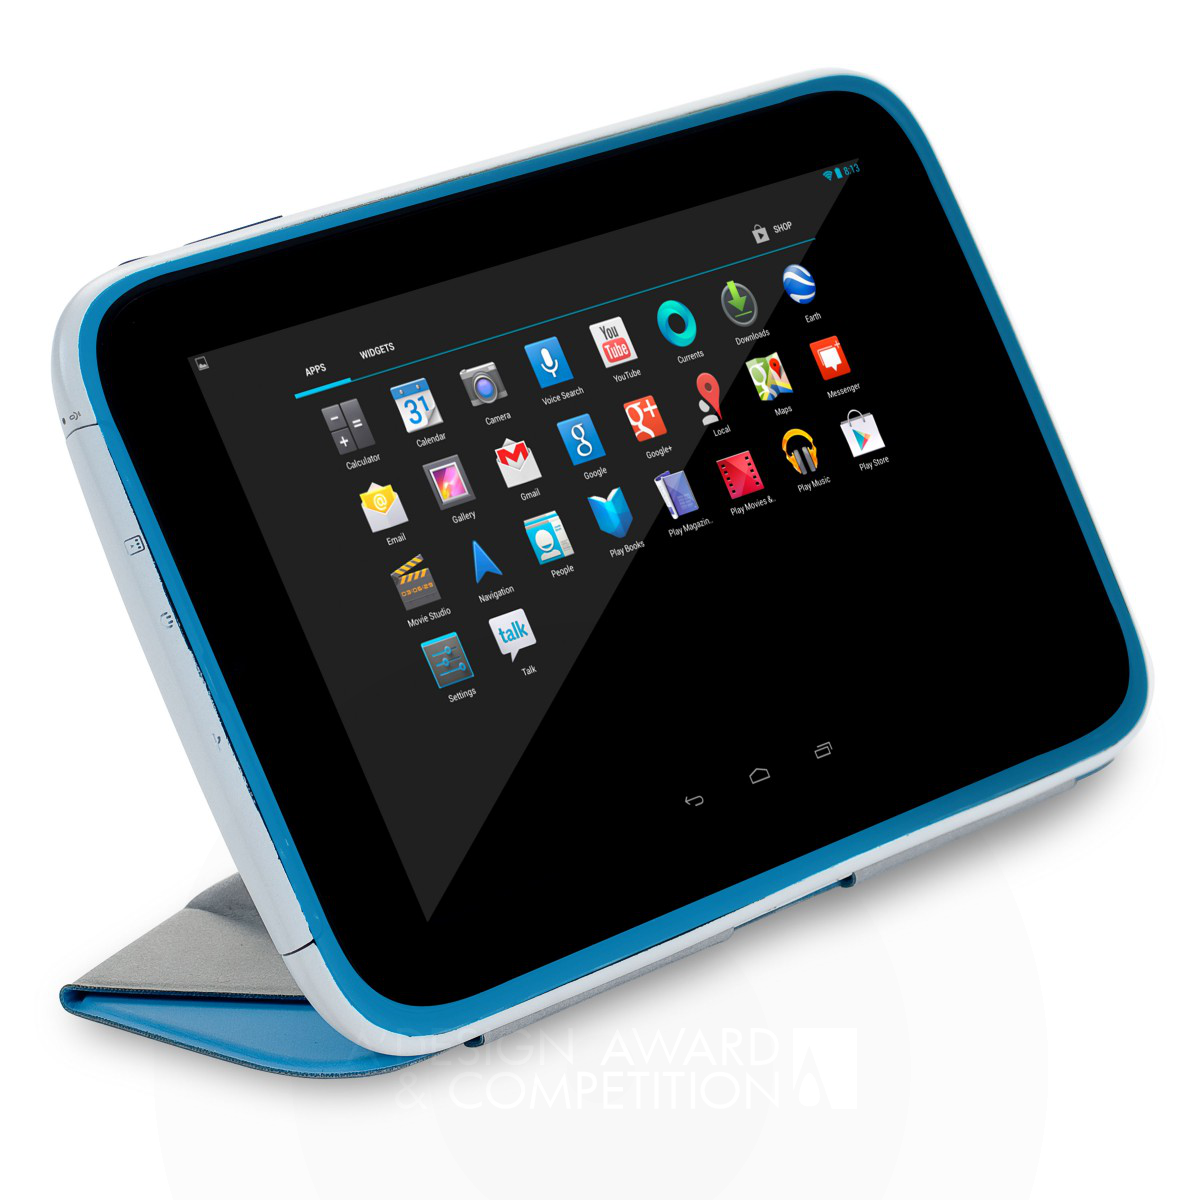 ANY 202 <b>Tablet for K-12 Education